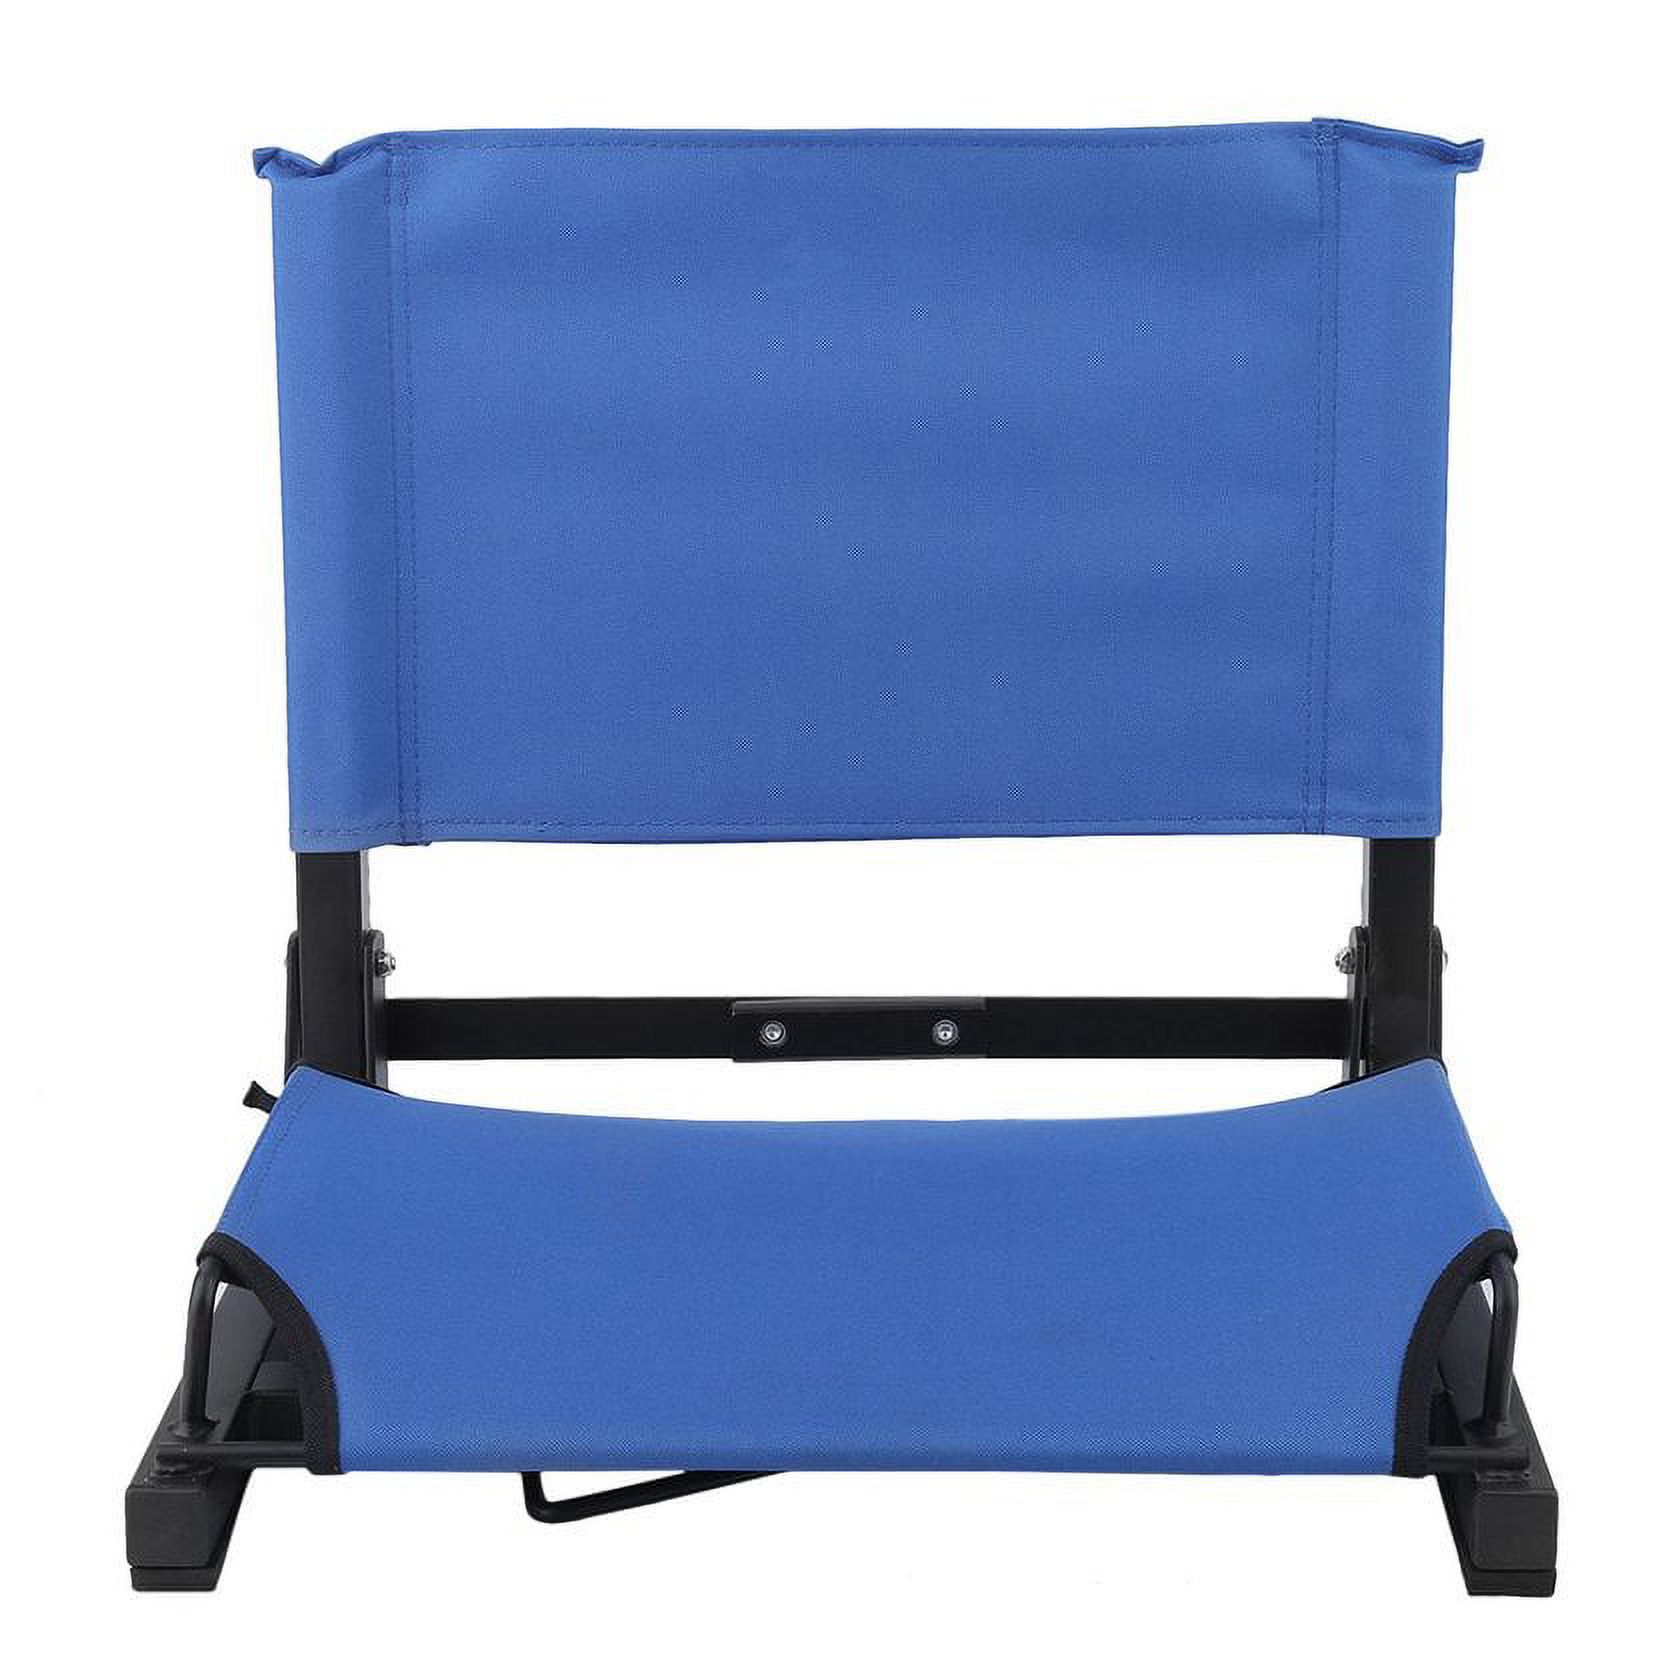 Bleacher Seats With Backs And Cushion，Folding Portable Stadium Bleacher Cushion Chair Durable Padded Seat With Back - image 5 of 7